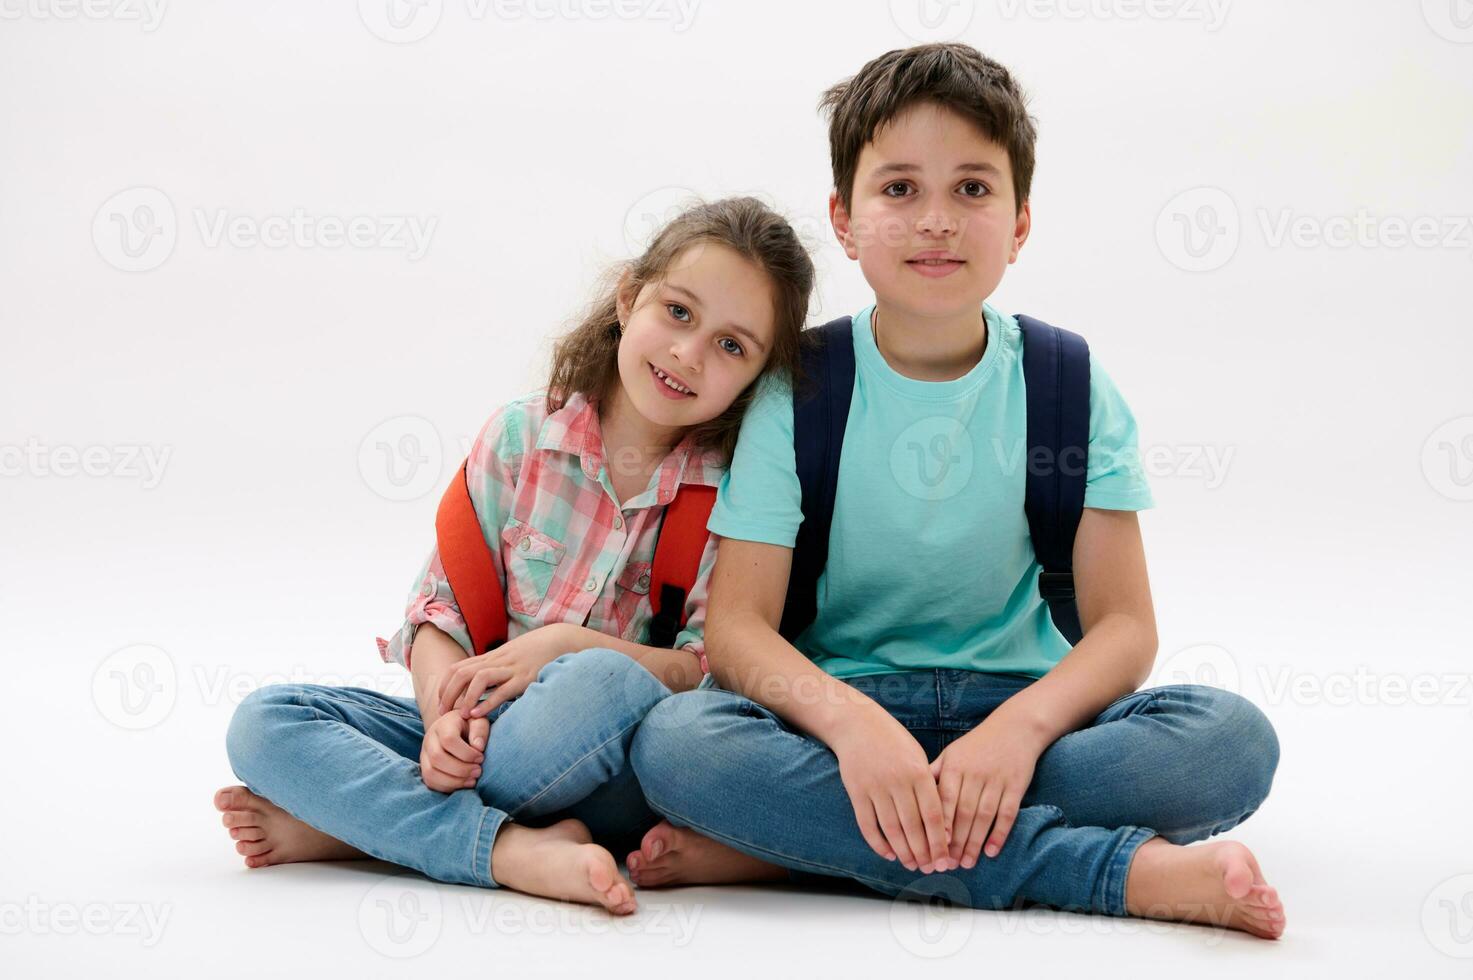 Authentic portrait of happy brother and sister, school kids with backpacks, smiling at camera, isolated white background photo